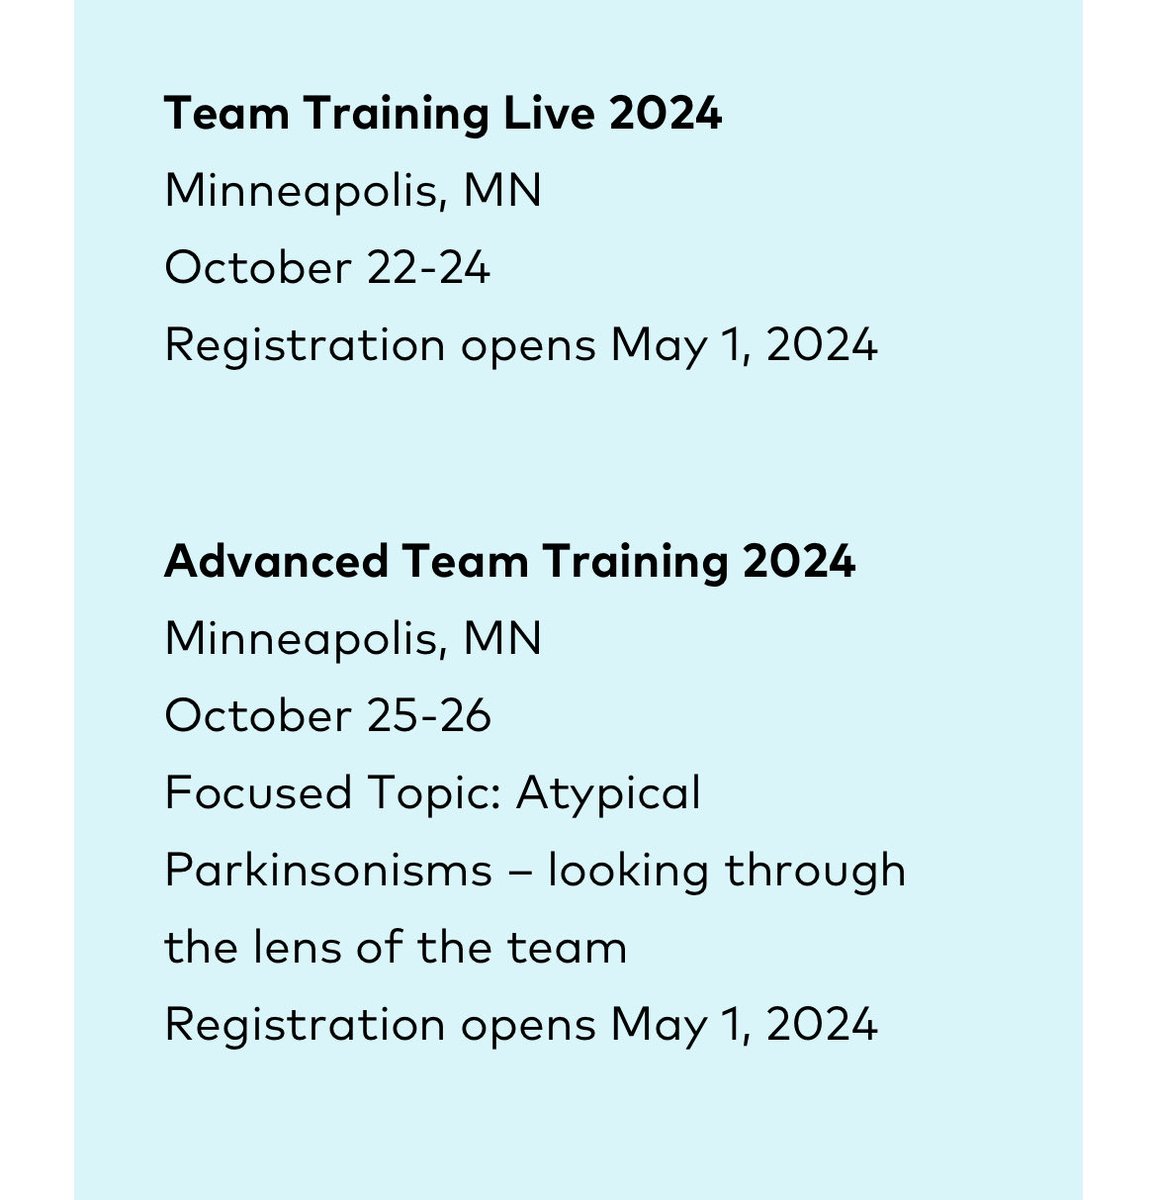 The @ParkinsonDotOrg Team Training and Advanced Team Training will be held in Minneapolis this year! @CurePSP is partnering with the Parkinson Foundation for the Advanced interdisciplinary course focused on atypical Parkinsonian syndromes. Join me!! parkinson.org/resources-supp…